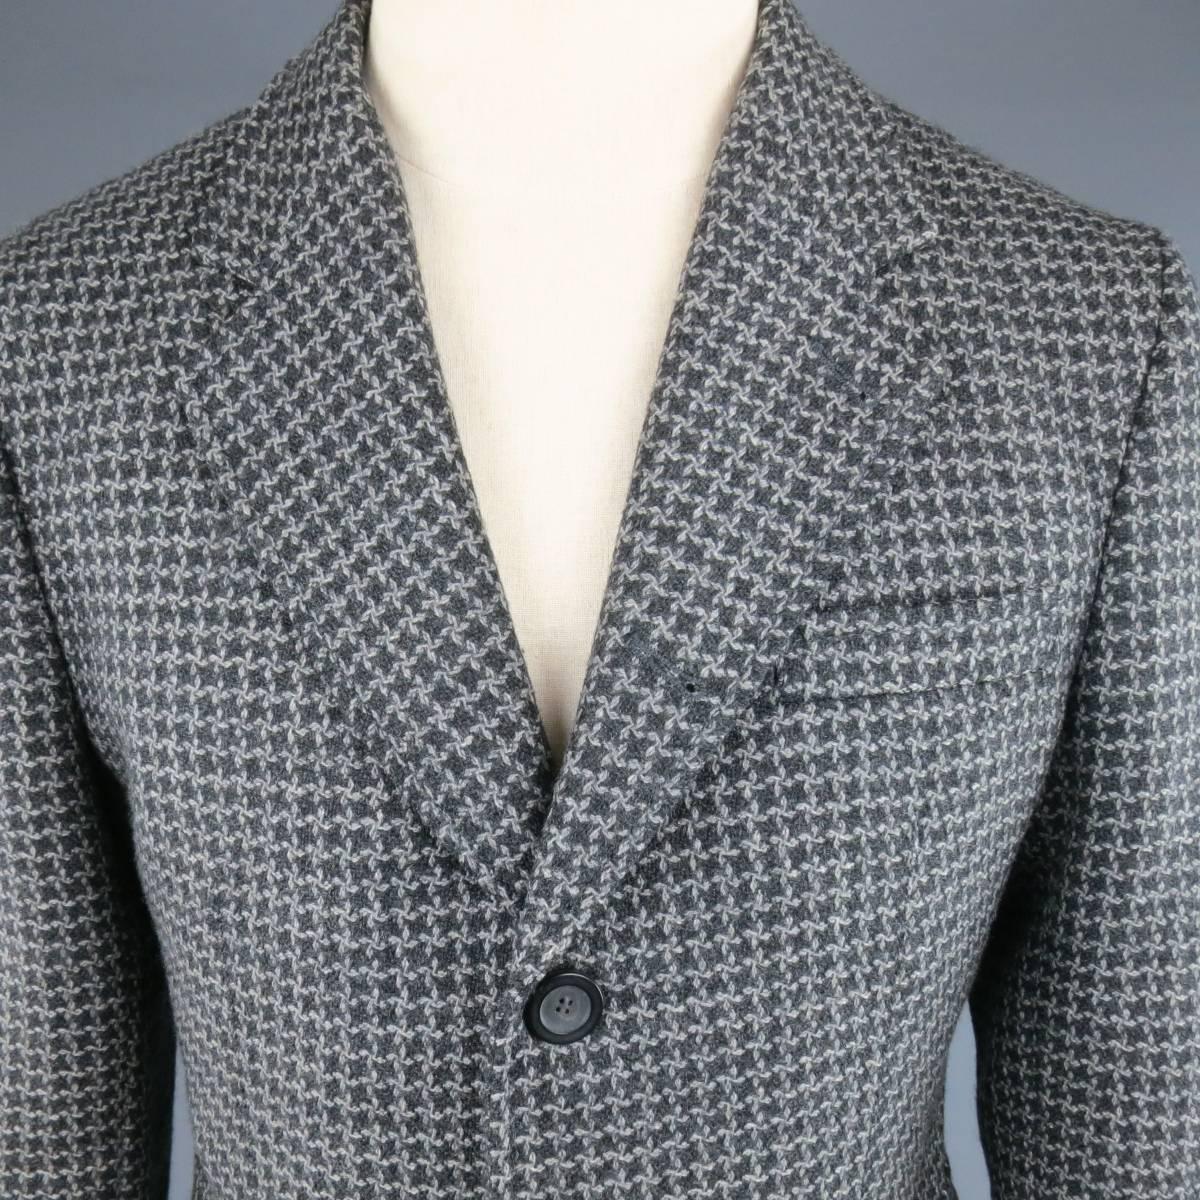 EMPORIO ARMANI three button sport coat in a gray and charcoal houndstooth virgin wool featuring a notch lapel and patch flap pockets. Made in Italy.
 
Excellent Pre-Owned Condition.
Marked:IT 50
 
Measurements:
 
Shoulder: 16 in
Chest: 42